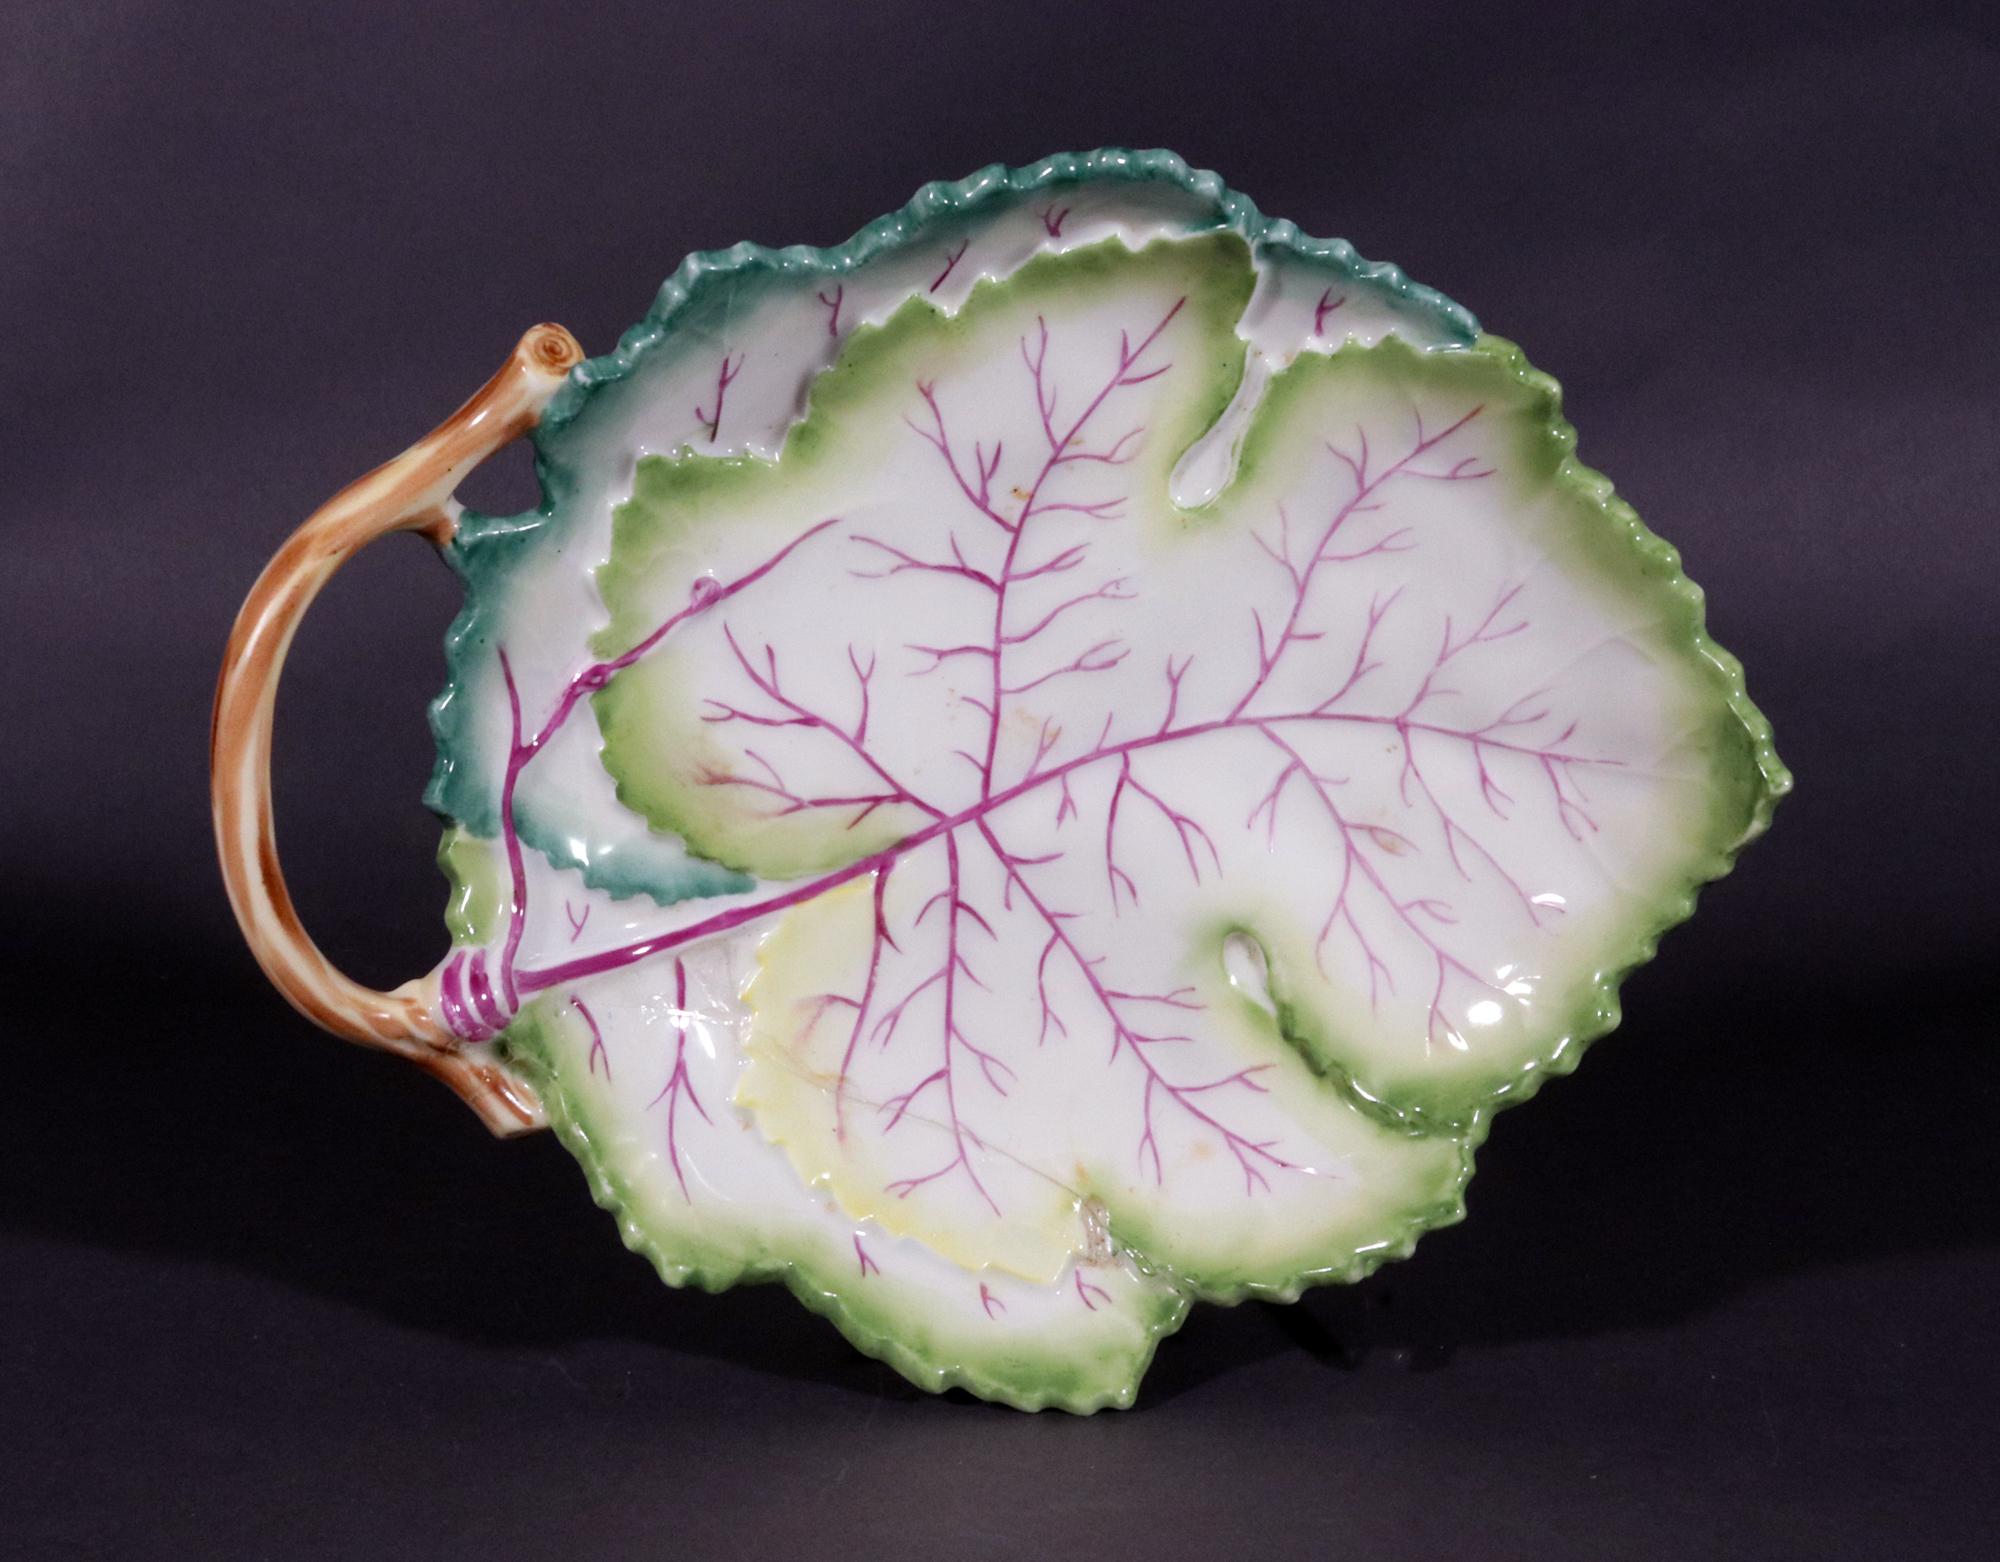 Royal Worcester Porcelain Trompe L'oeil Leaf-shaped Dishes,
Bone China, 
Pattern 3628,
Set of Five,
Circa 1958

The set of five Royal Worcester Bone China trompe l'oeil Leaf-shaped dishes are naturalistically modeled in the form of two large